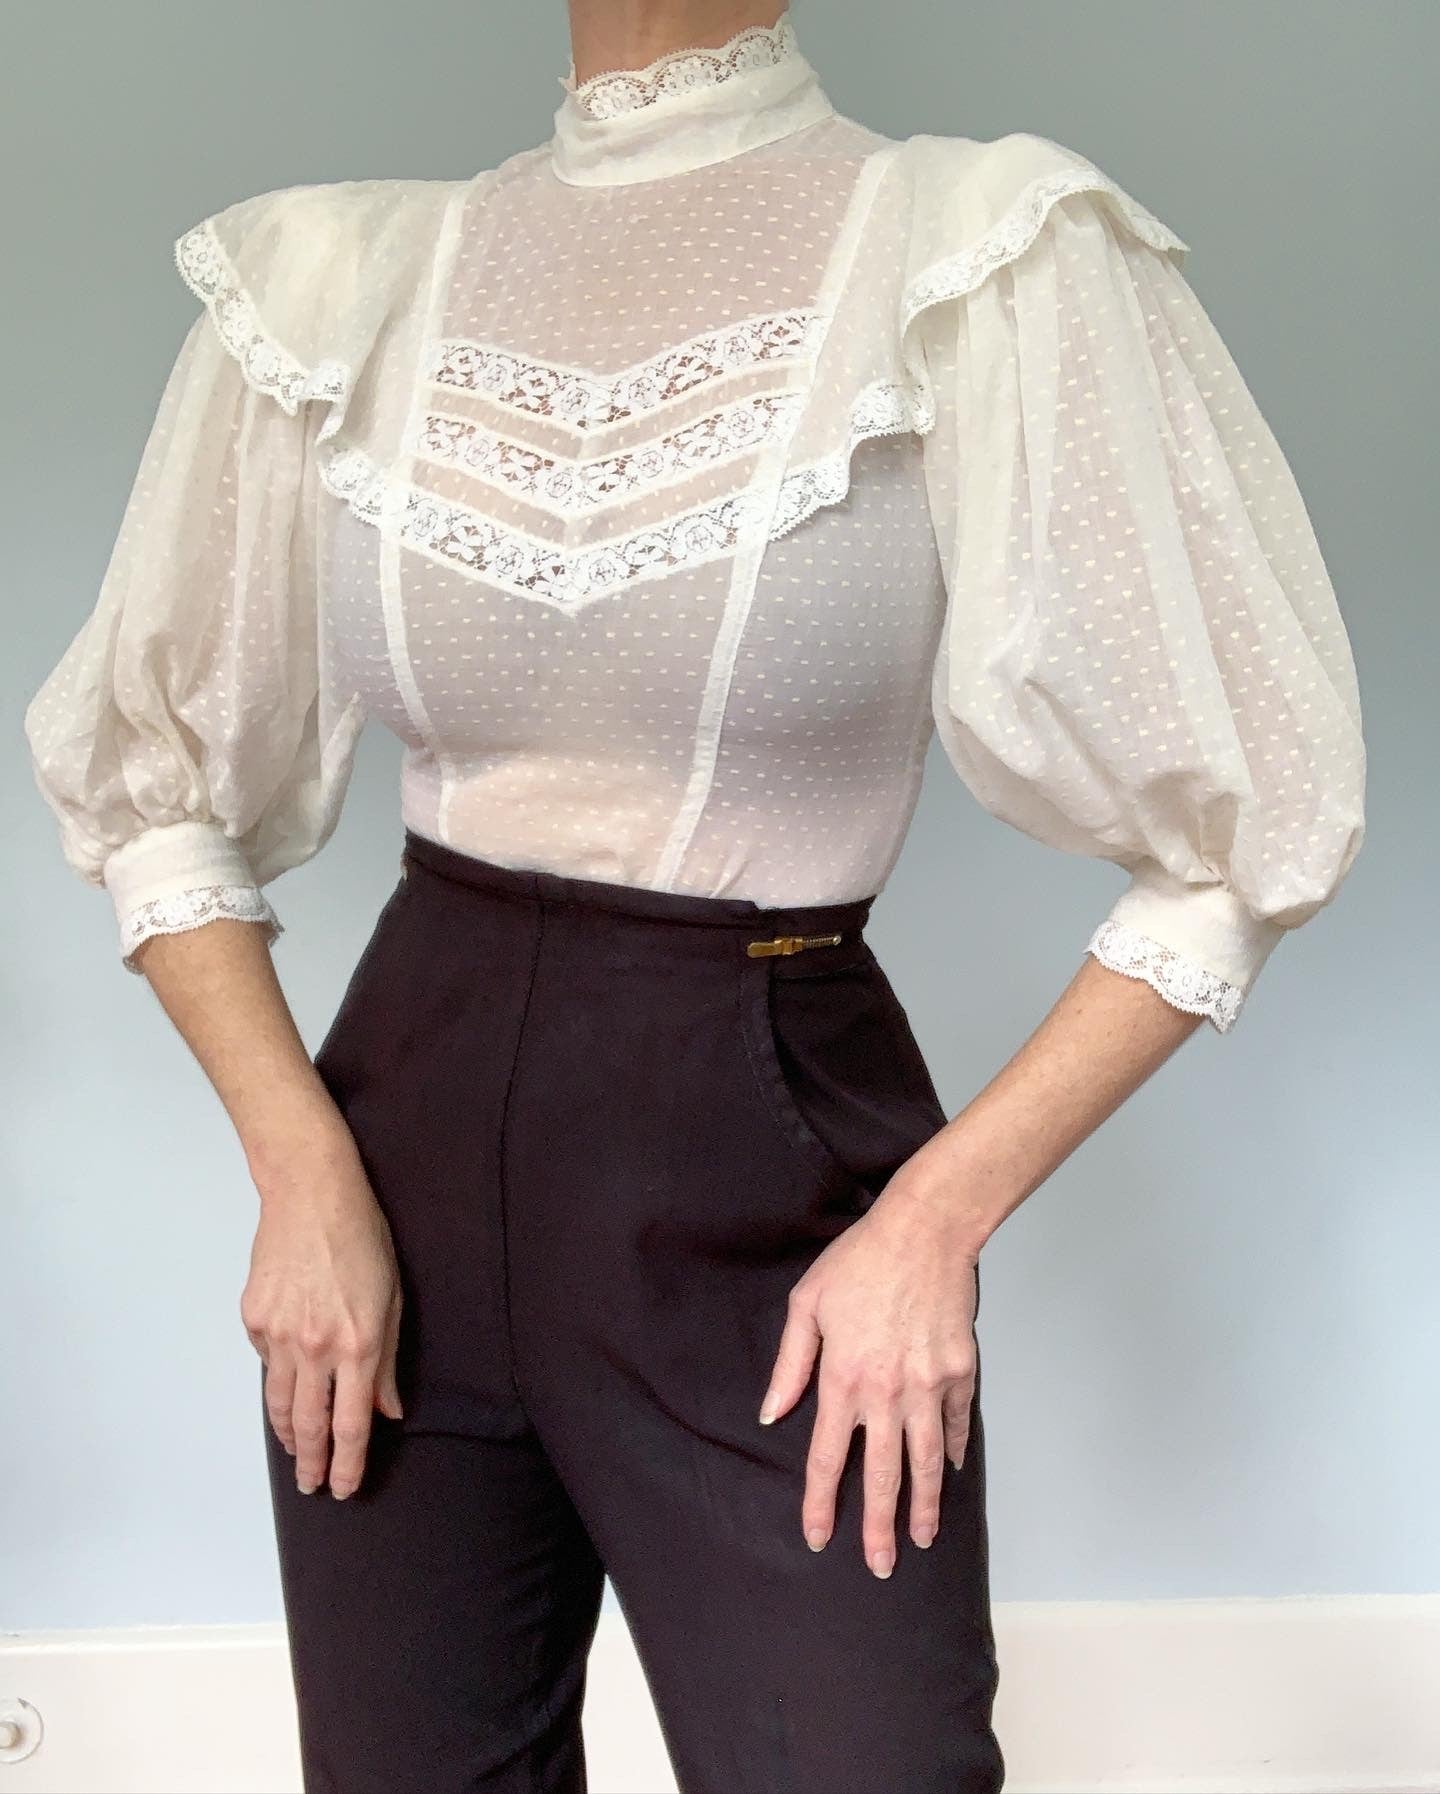 1970s Semi Sheer Cotton Swiss Dot Hourglass Victorian Inspired Blouse with Huge Balloon Sleeves